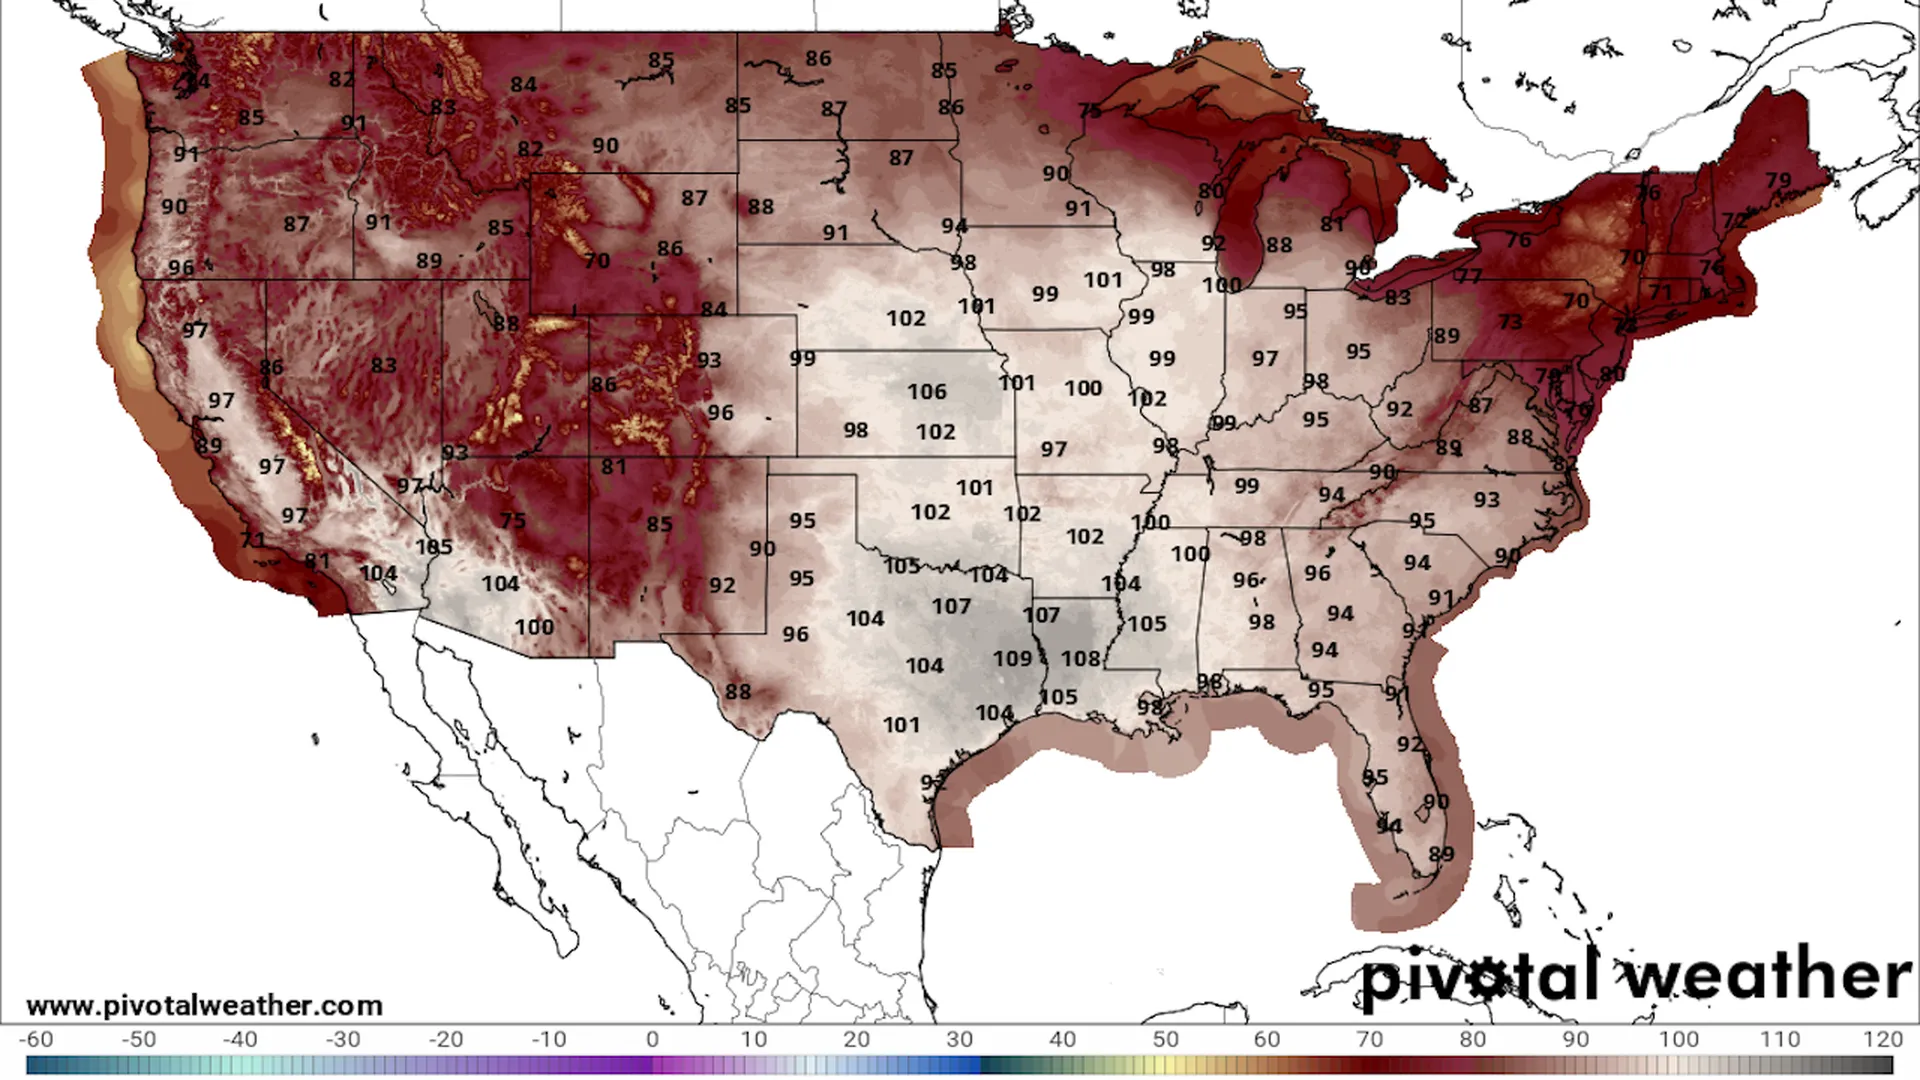 NWS forecast map for daily high temperatures on 24 August 2023. Historical weather data indicates that the heat dome was stronger than that seen in August 1936, during the Dust Bowl-era. Graphic: Pivotal Weather